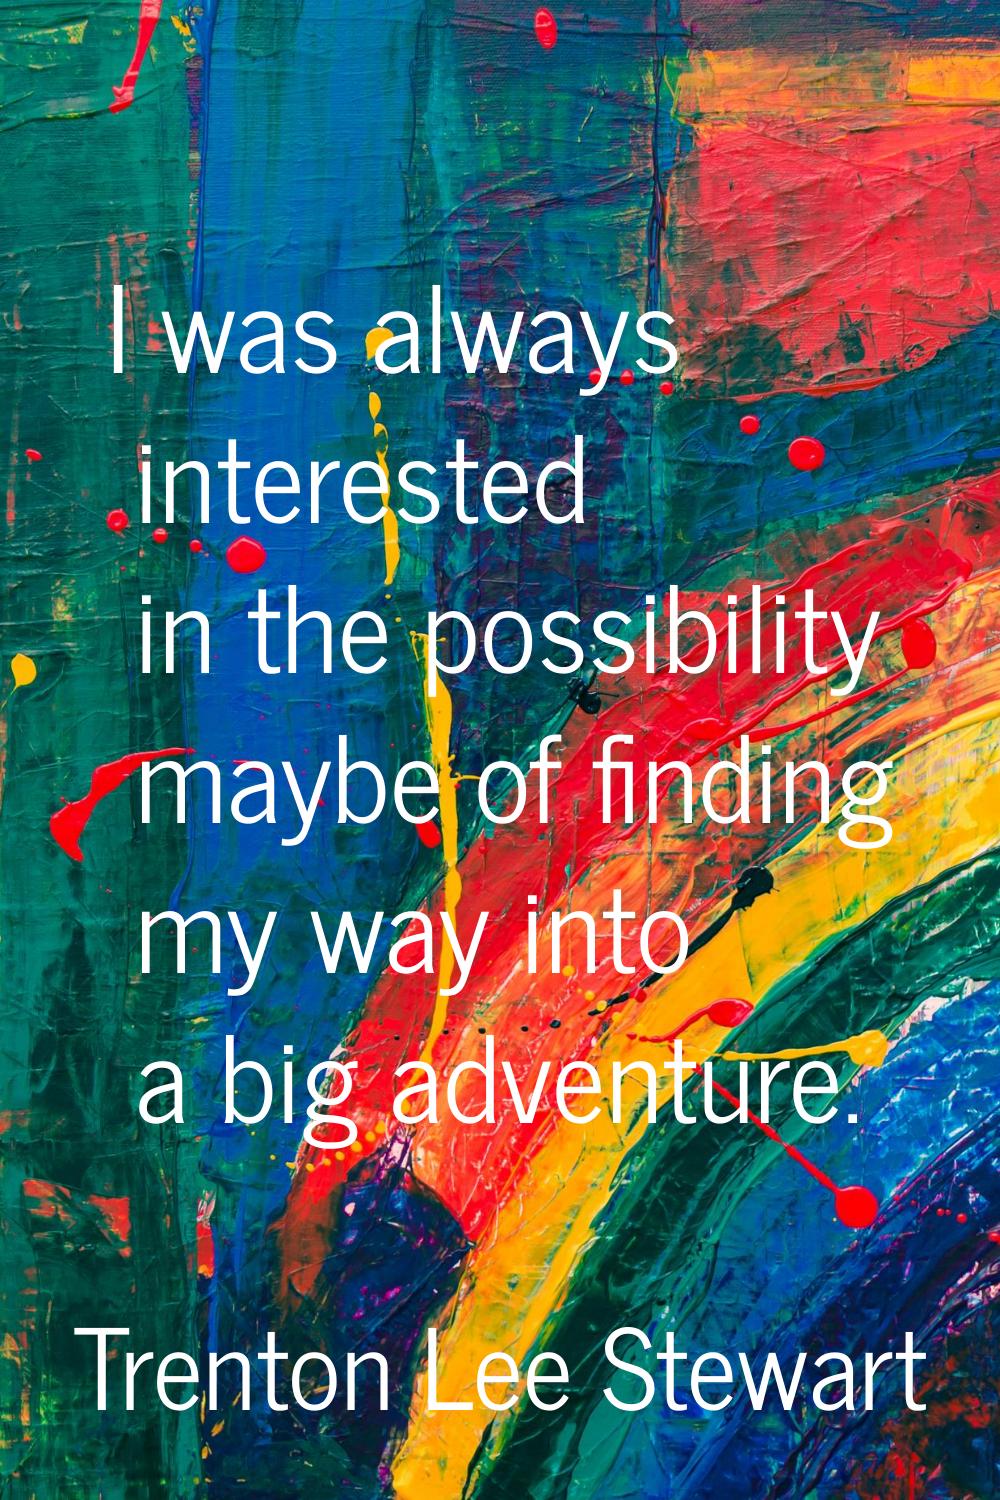 I was always interested in the possibility maybe of finding my way into a big adventure.